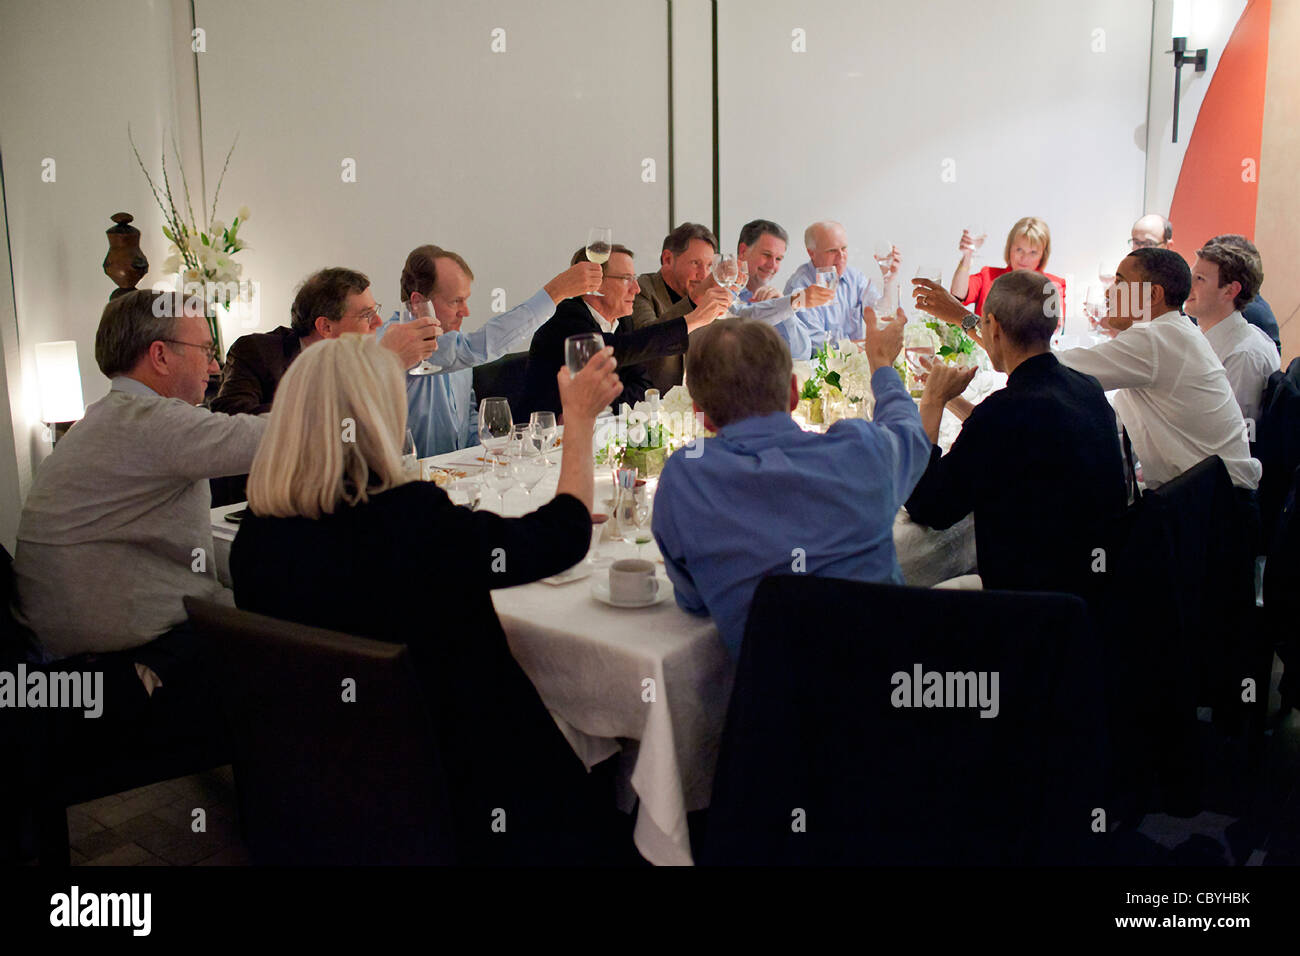 President Barack Obama joins a toast with technology business leaders at a dinner February 17, 2011 in Woodside, CA. Among those attending were the late Steve Jobs, to the President's left, and Facebook founder Mark Zuckerberg, to the President's right. Stock Photo